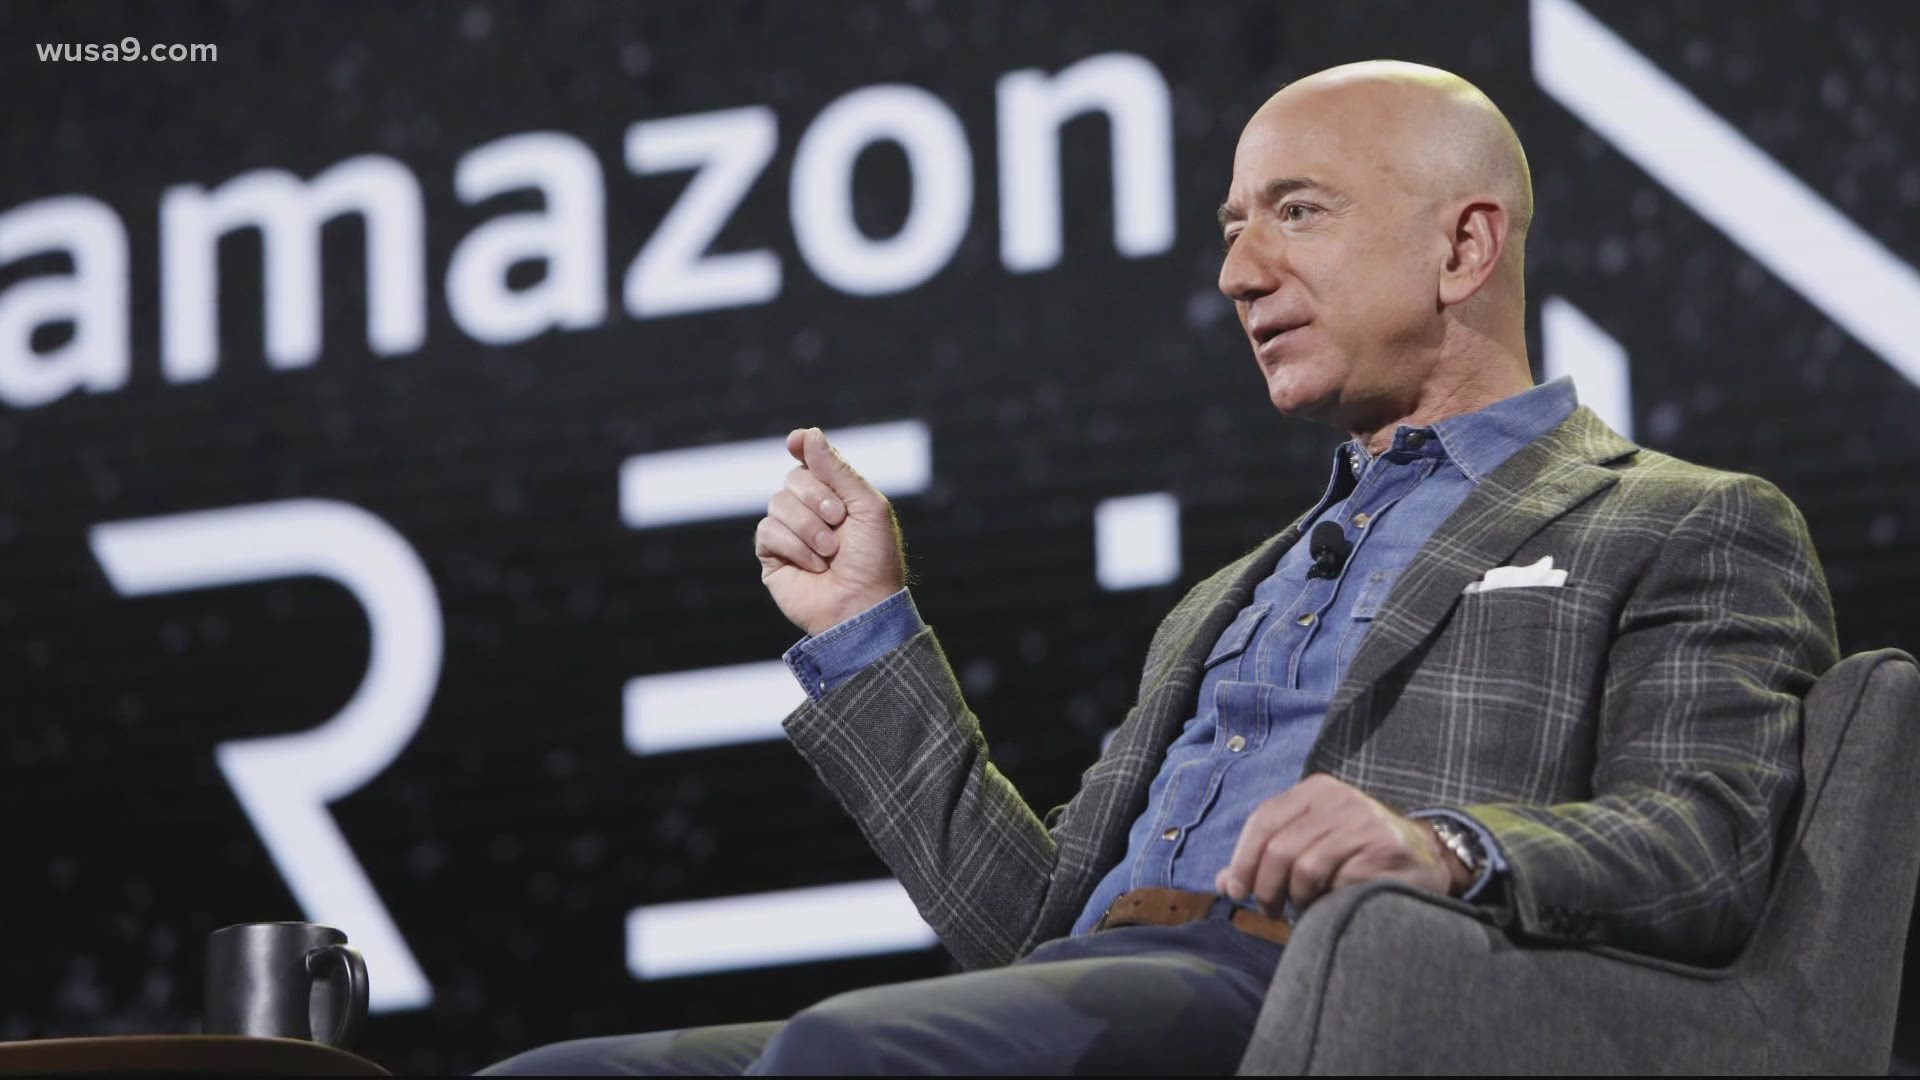 Bezos being a part of the team could be a win for everybody involved.